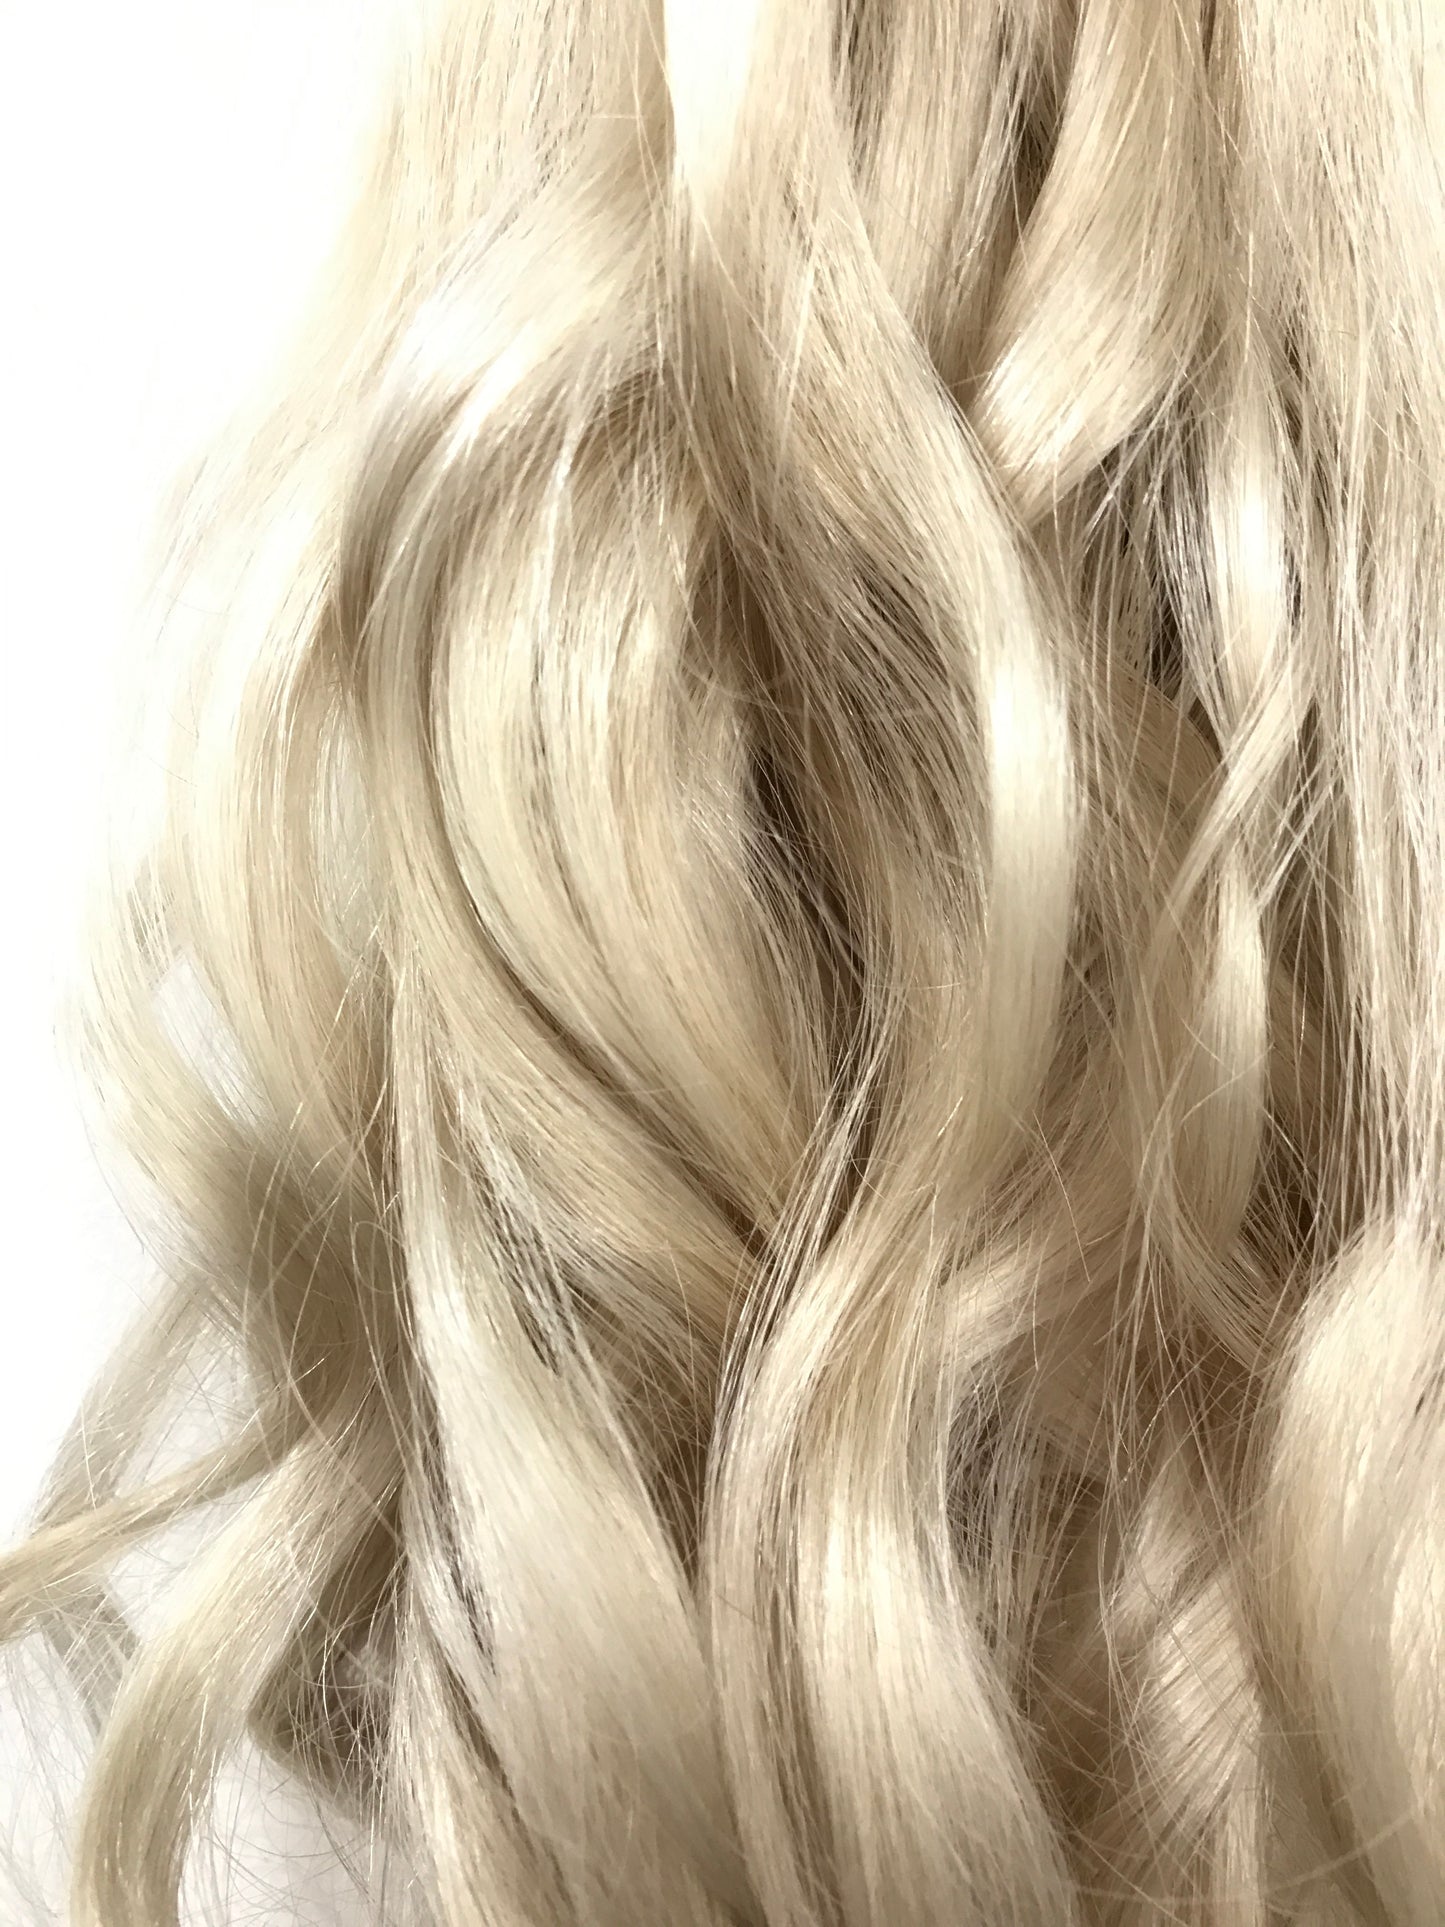 Russian Remy Human Hair, 1g i-Tip, 20'', Wavy, 50g,Colour 60. Quick Shipping!